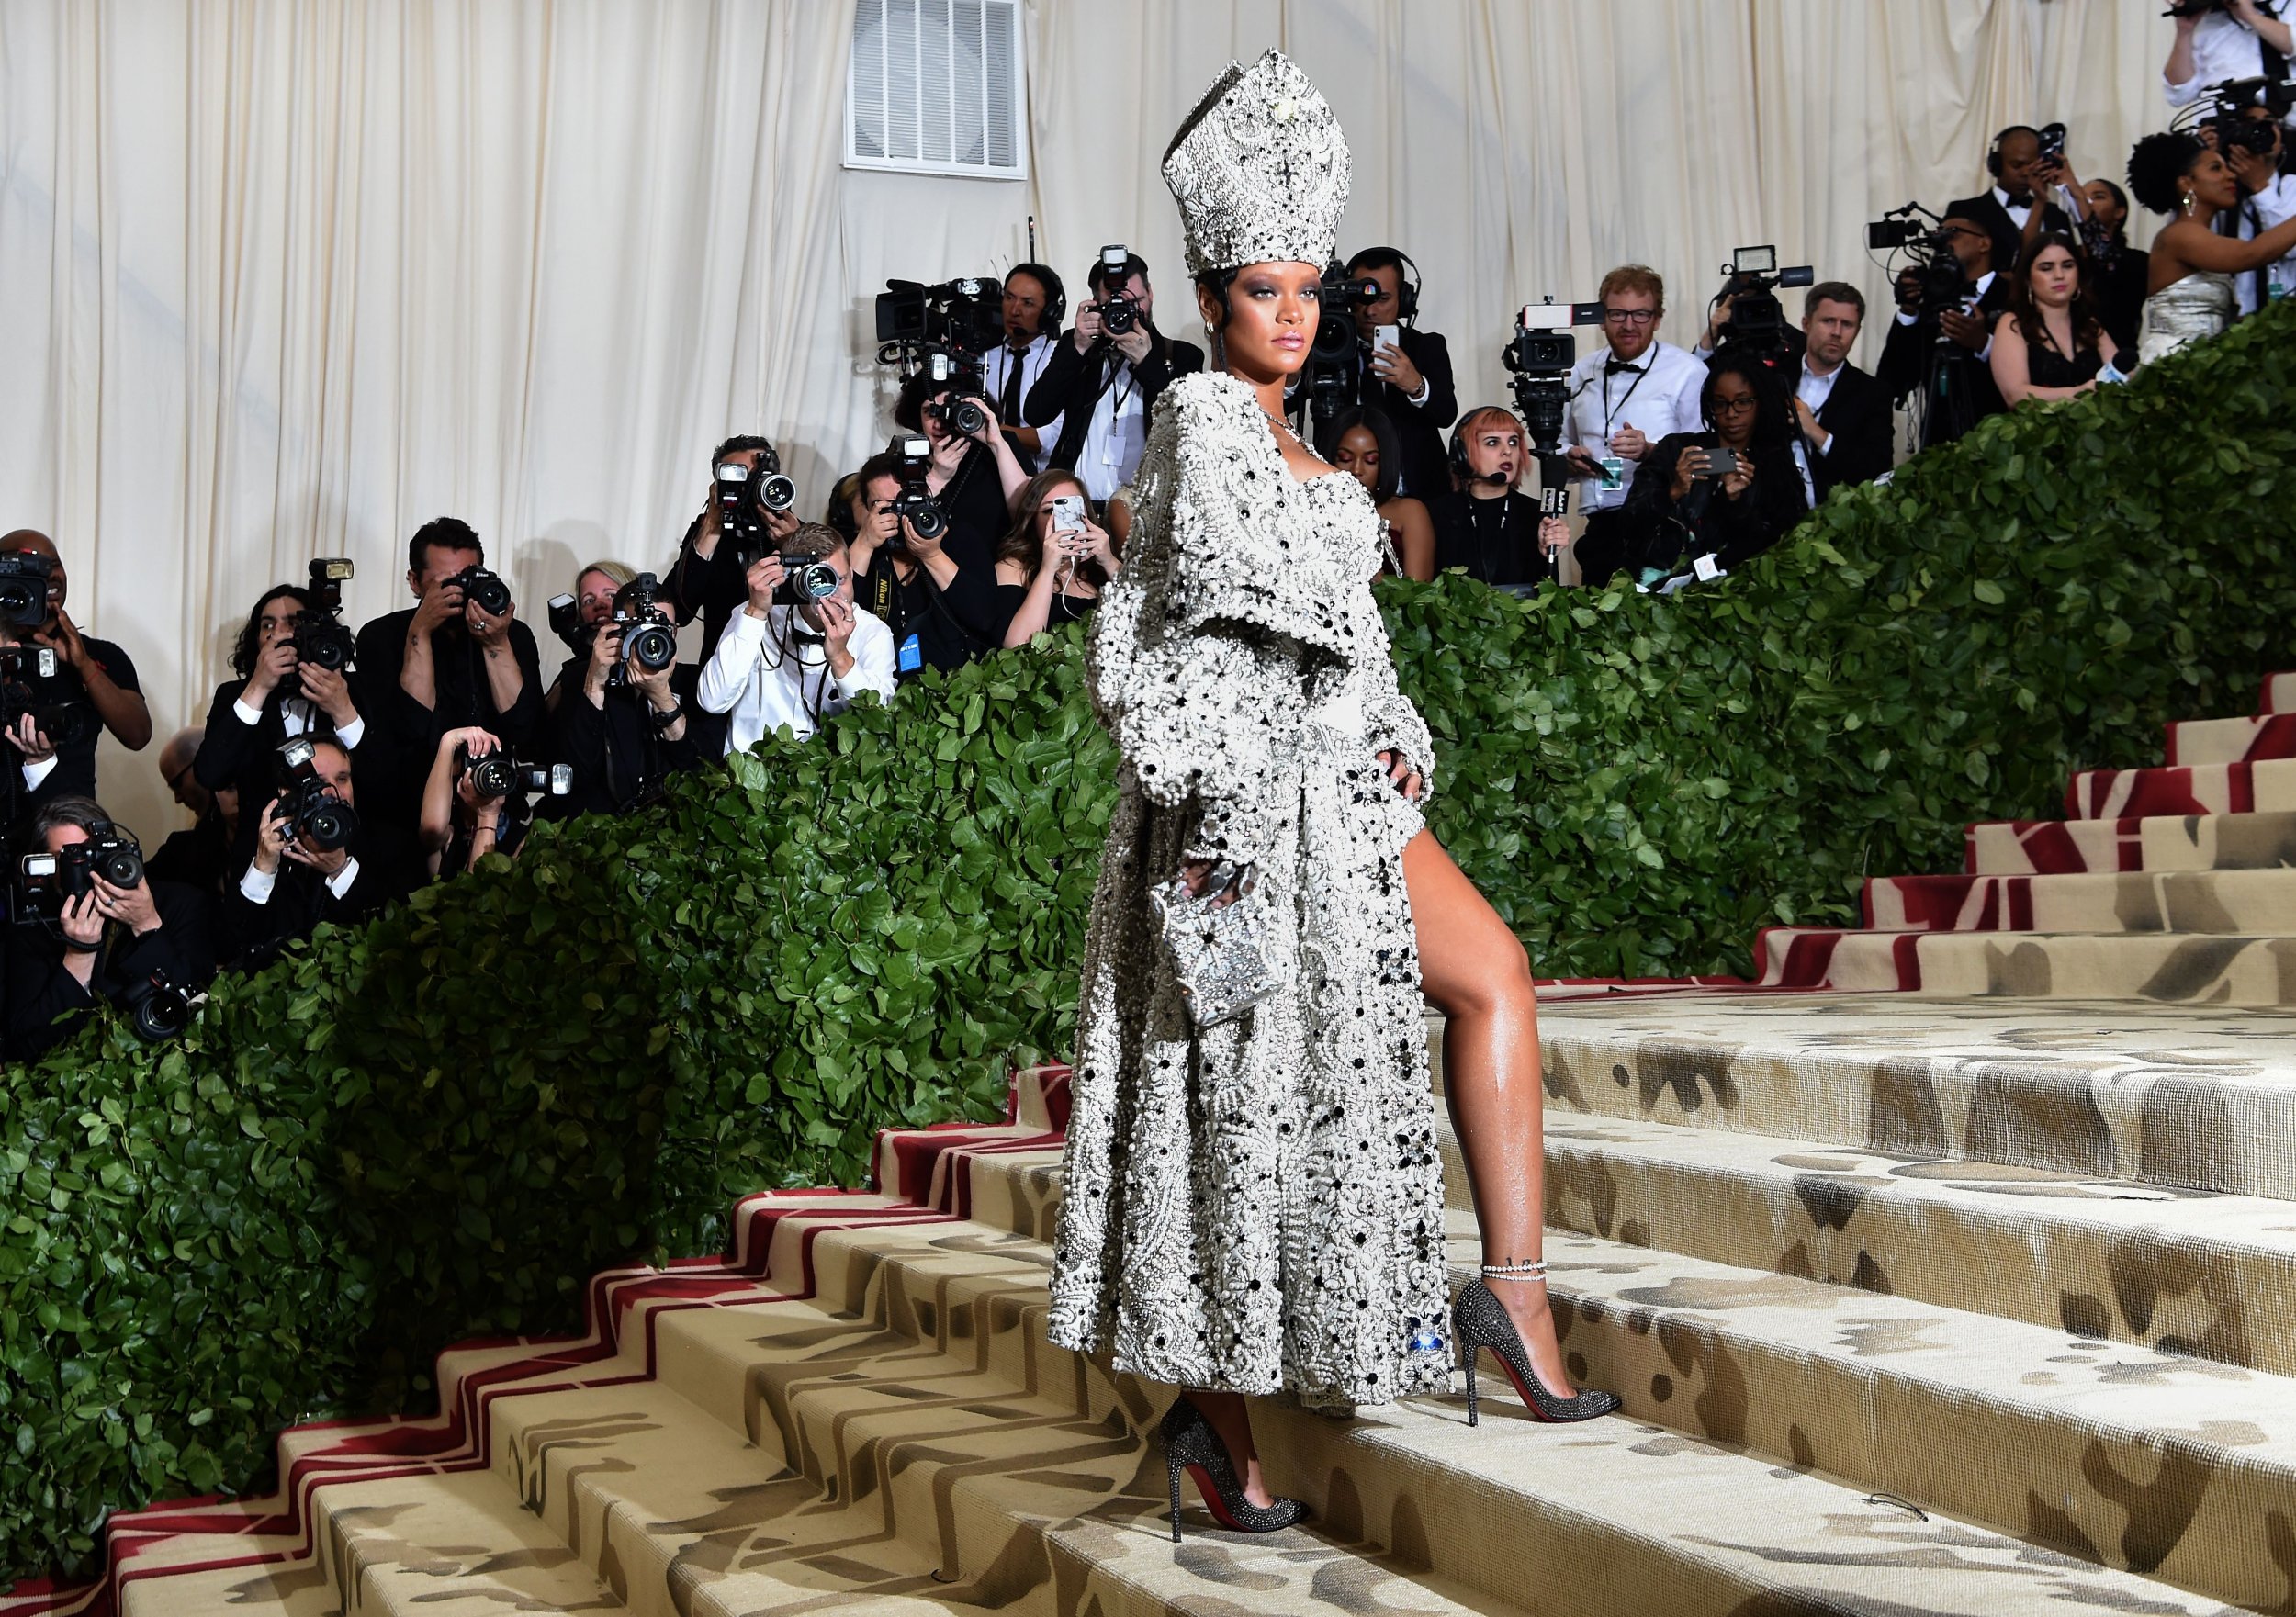 Met Gala 2019 TV Channel, Live Stream: What Time, TV Channel is Met Gala On Tonight?